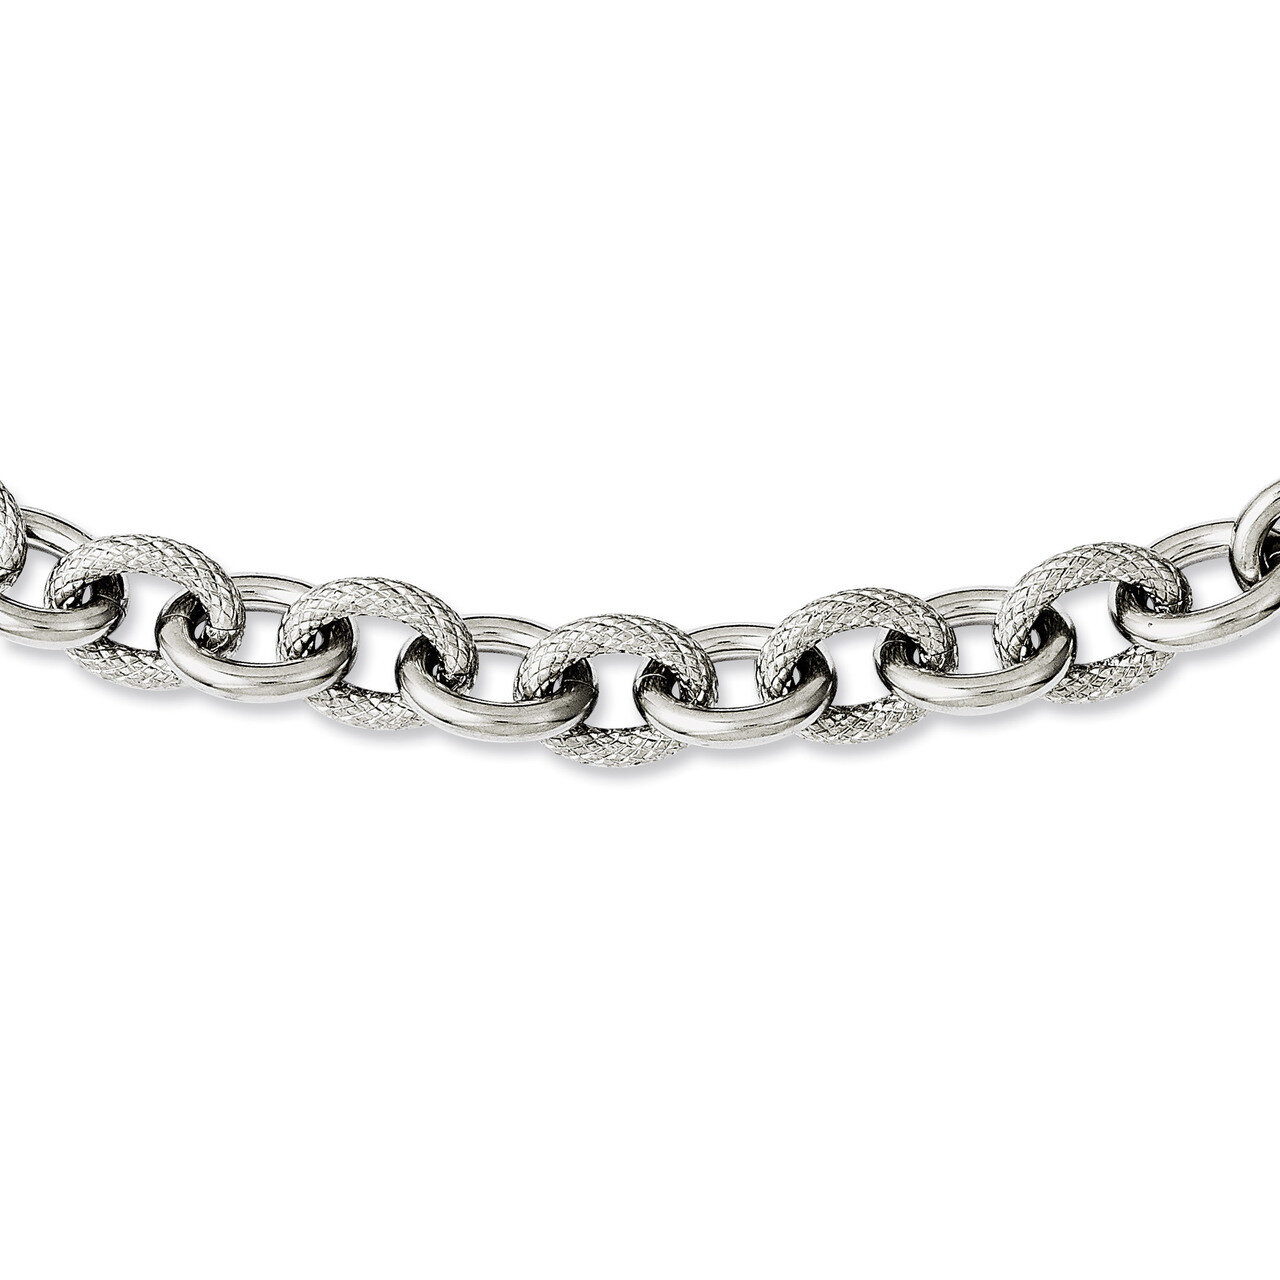 Textured & Polished 20 Inch Necklace Stainless Steel SRN966-20